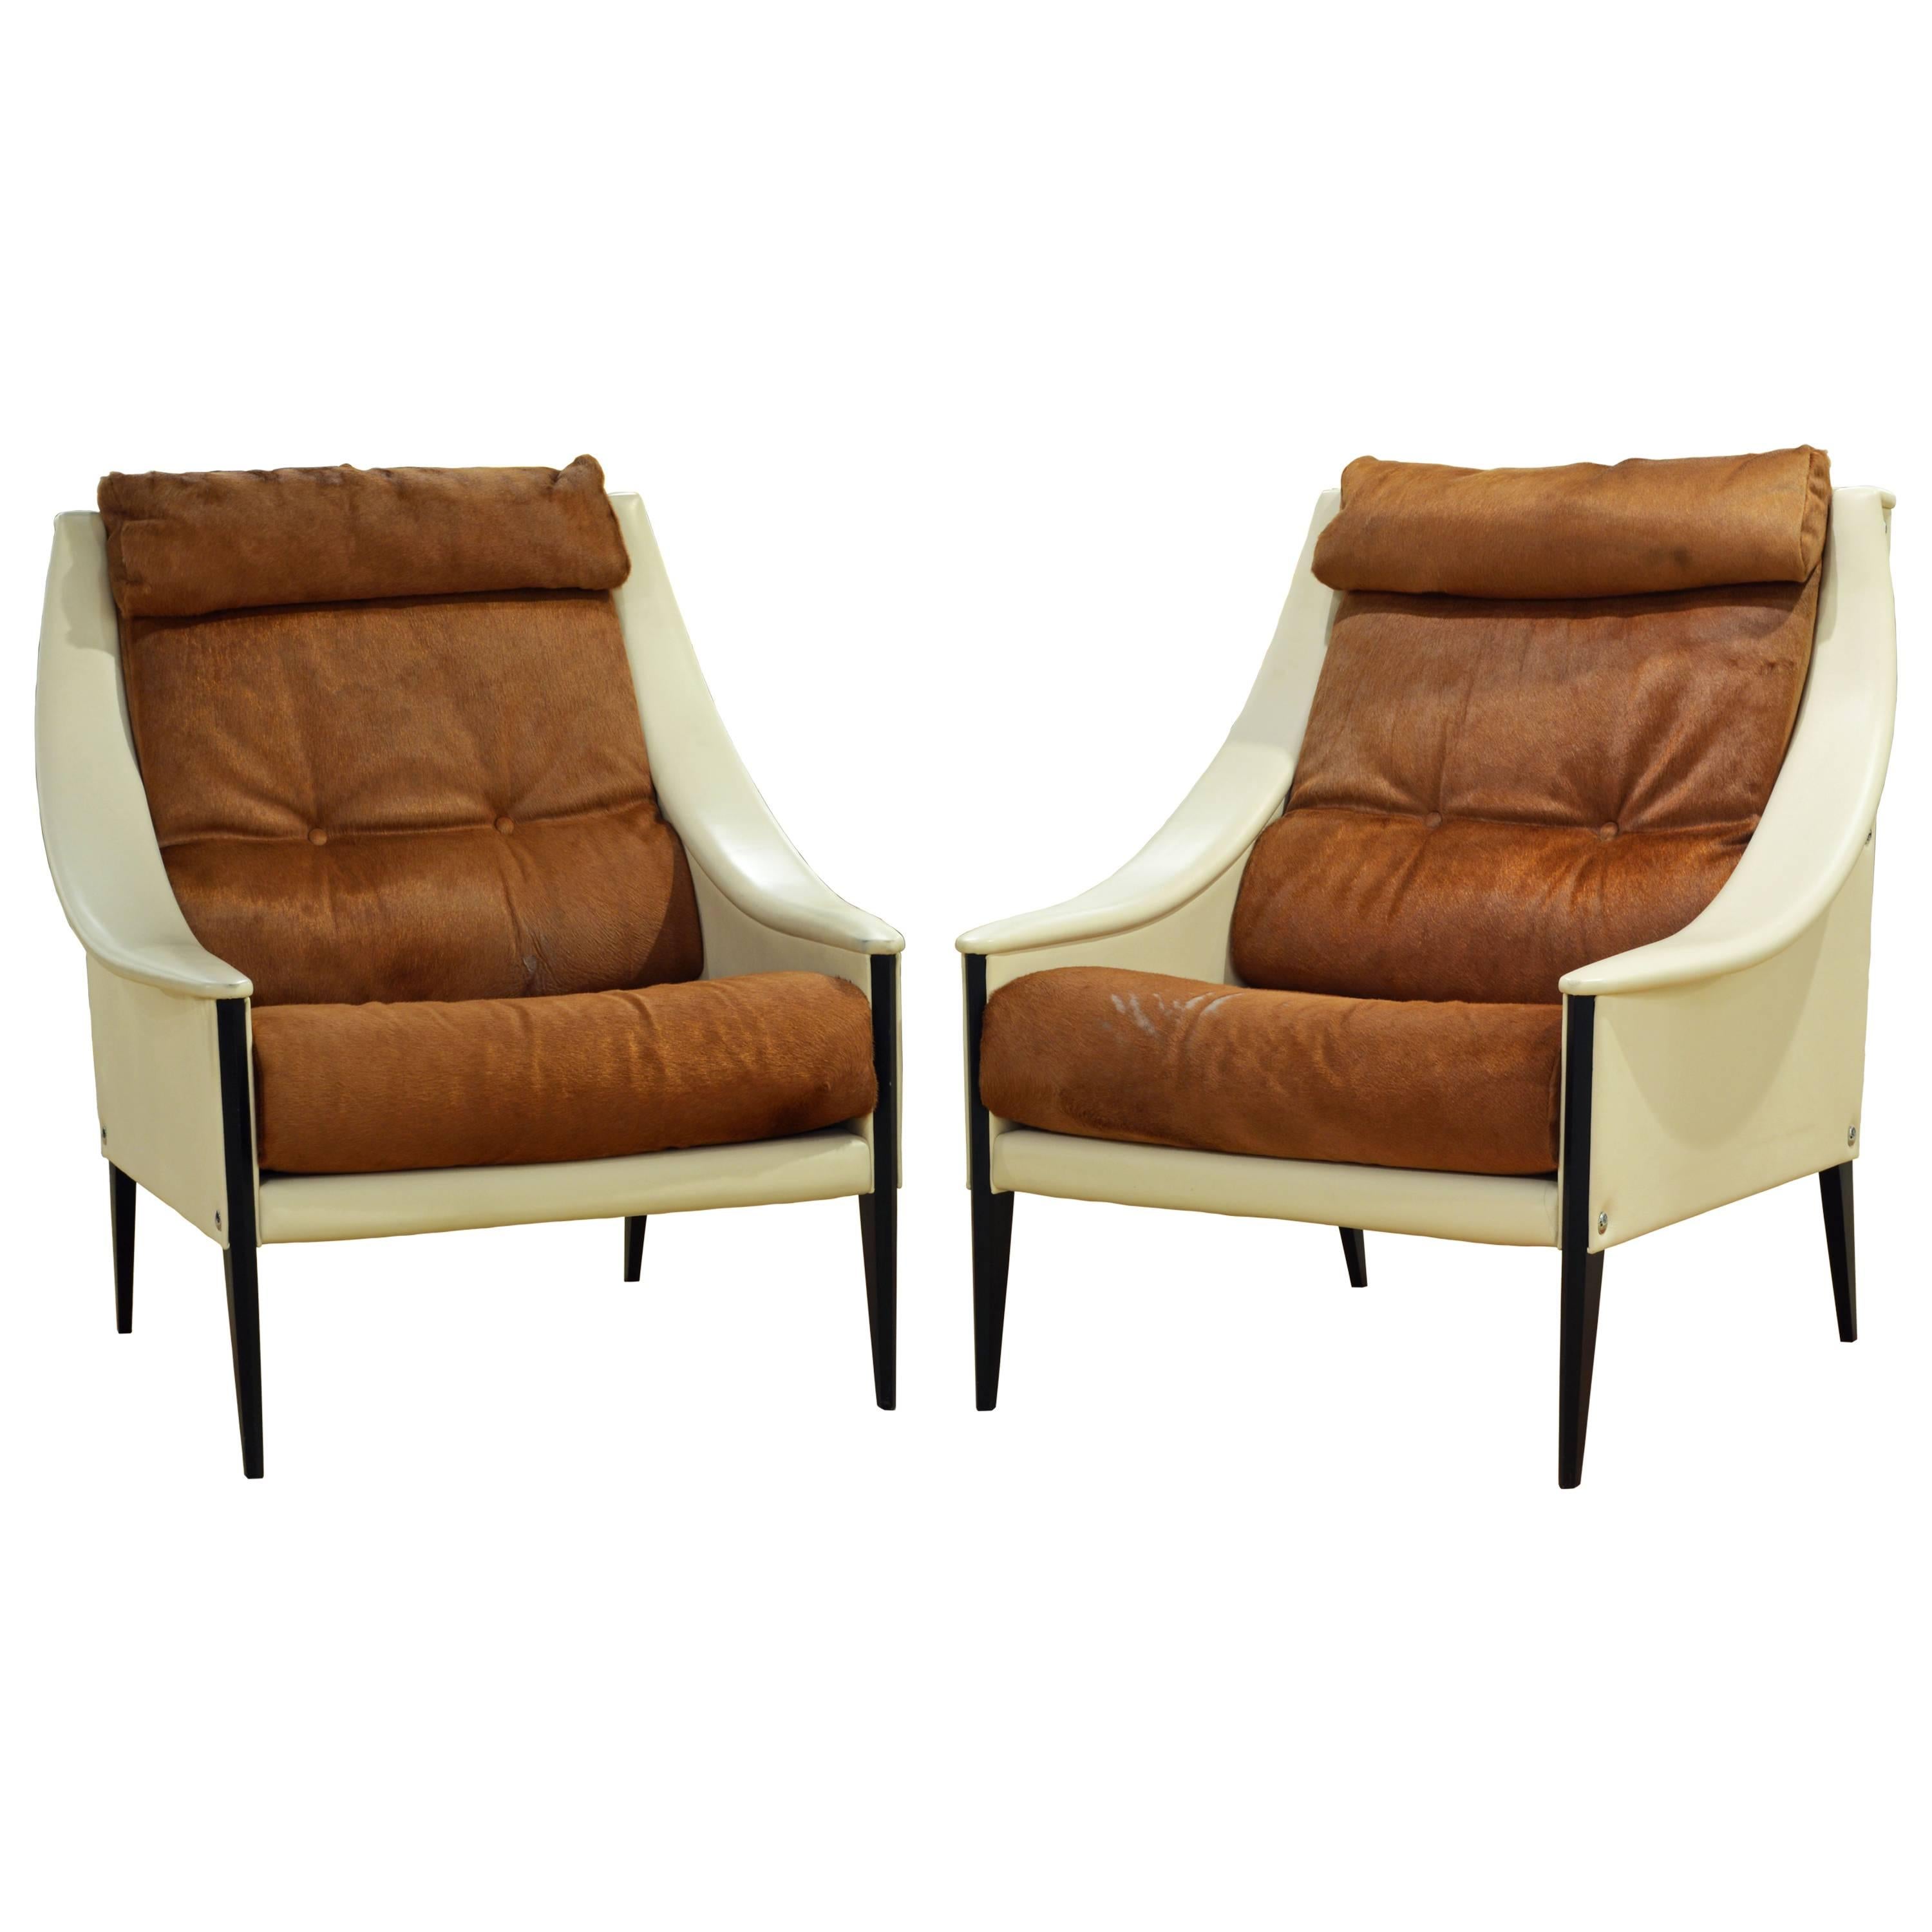 Pair of Poltrona Frau 'Dezza' Leather and Cow Hide Lounge Chairs by Gio Ponti